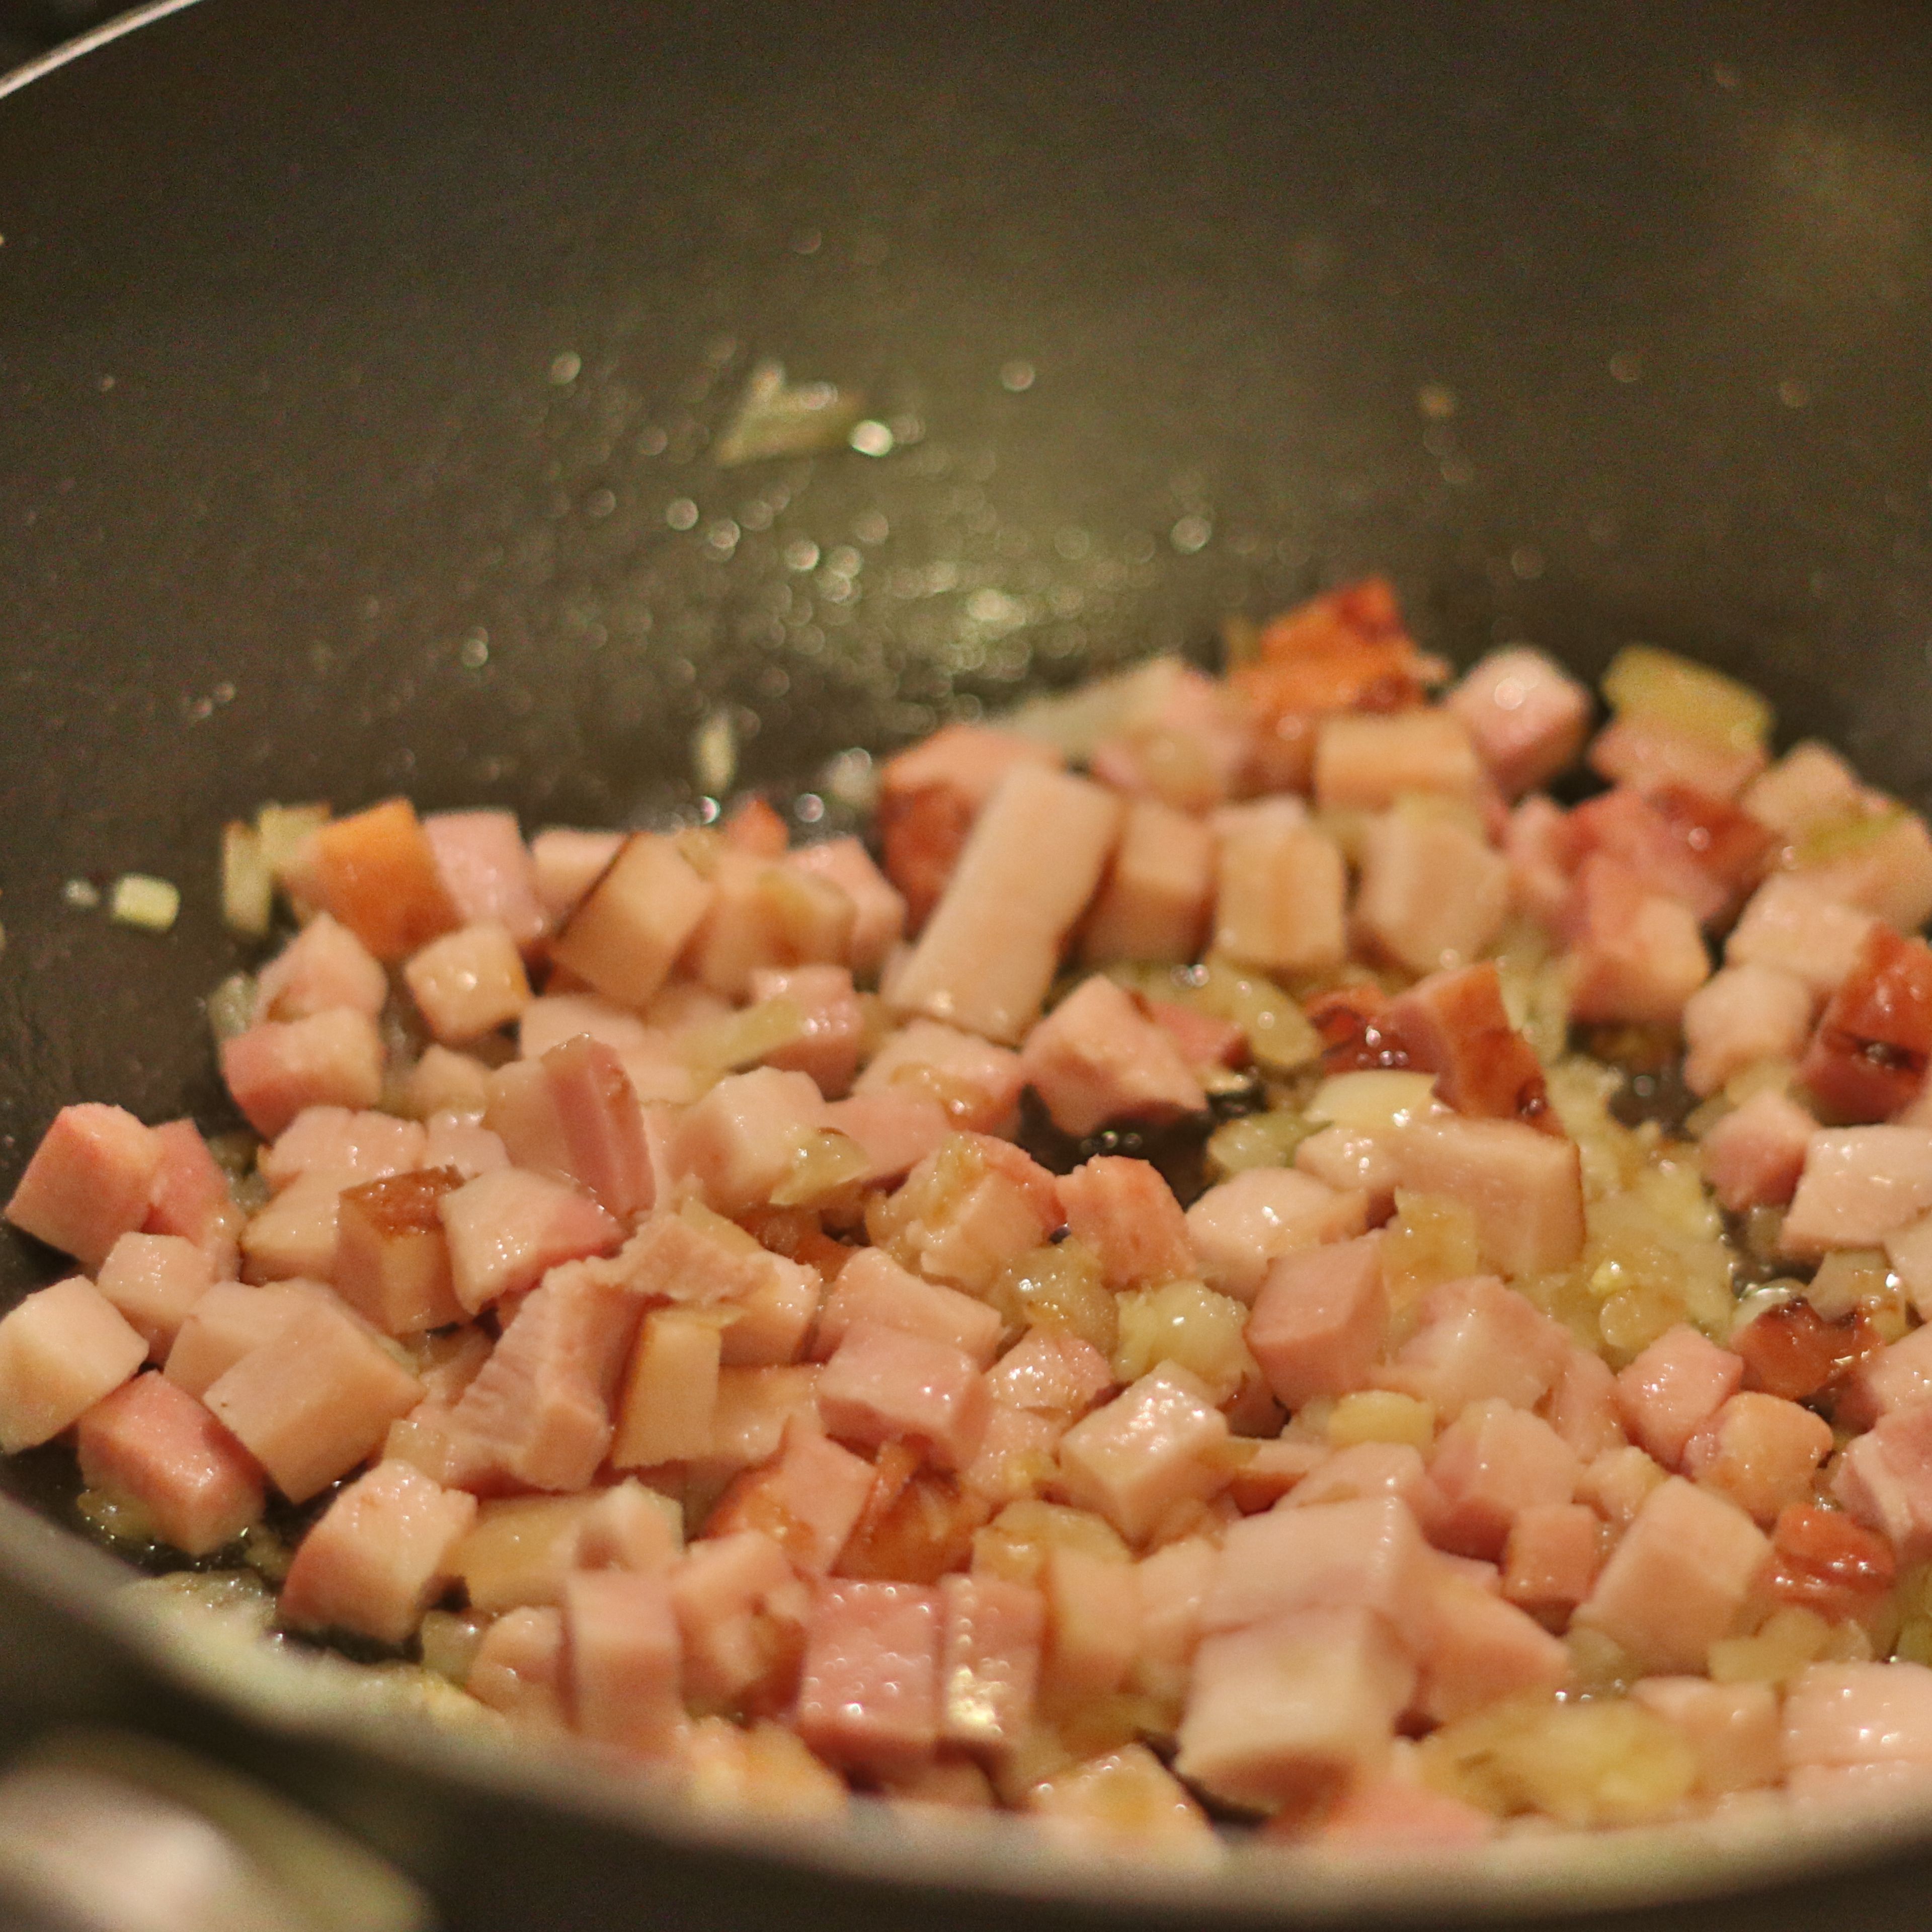 Add bacon and continue cooking on medium heat until soft, approx 5 minutes.